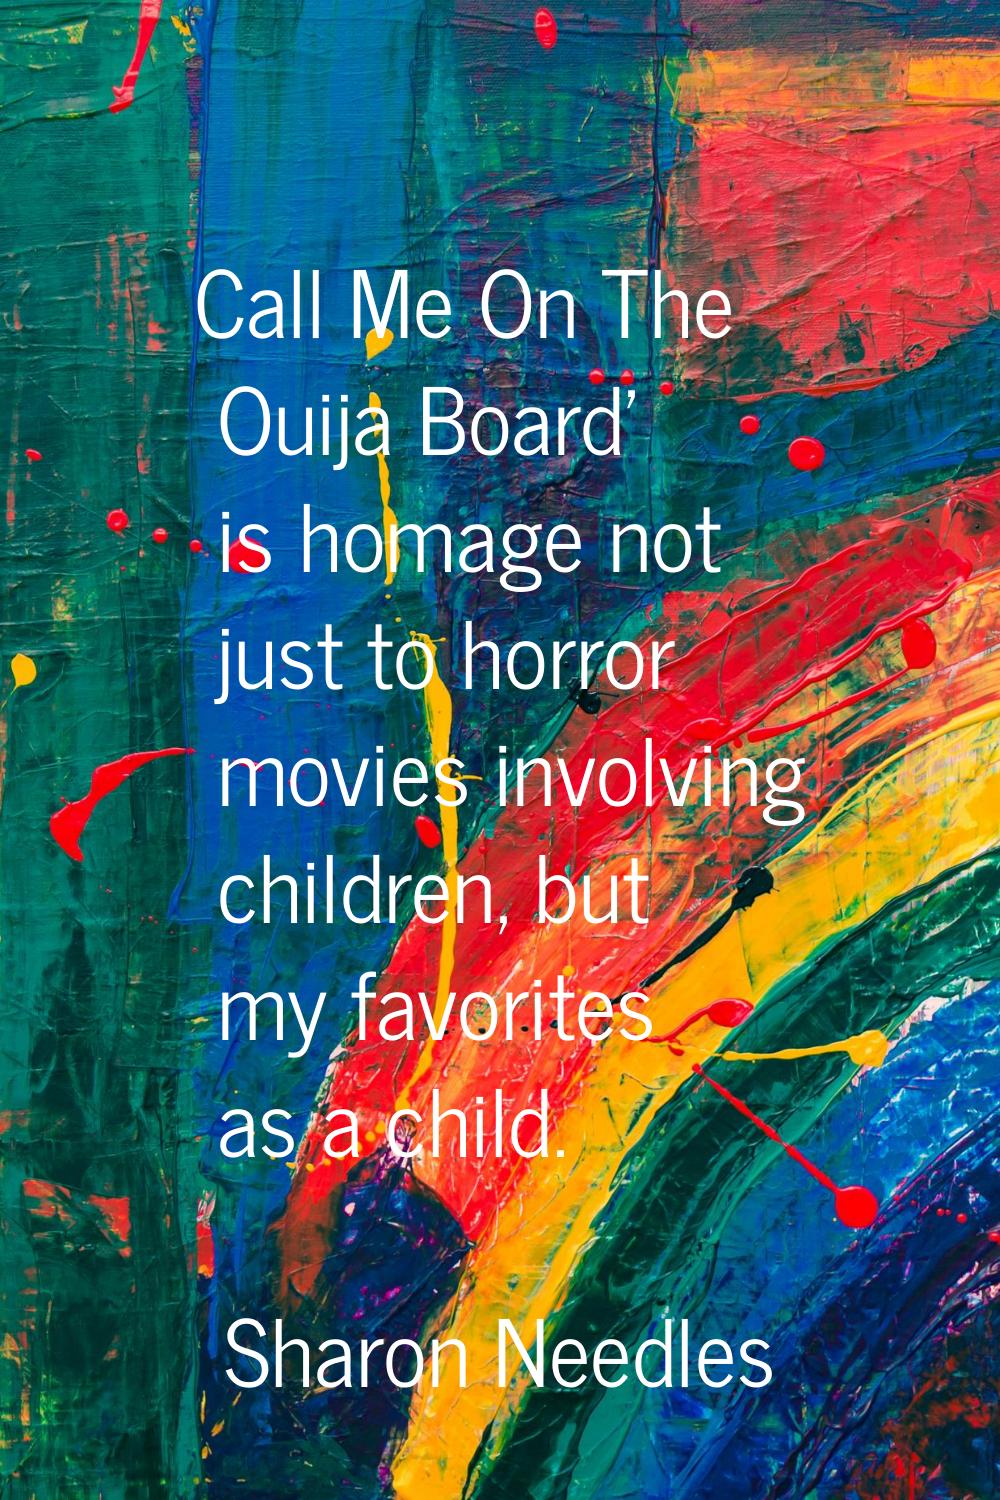 Call Me On The Ouija Board' is homage not just to horror movies involving children, but my favorite